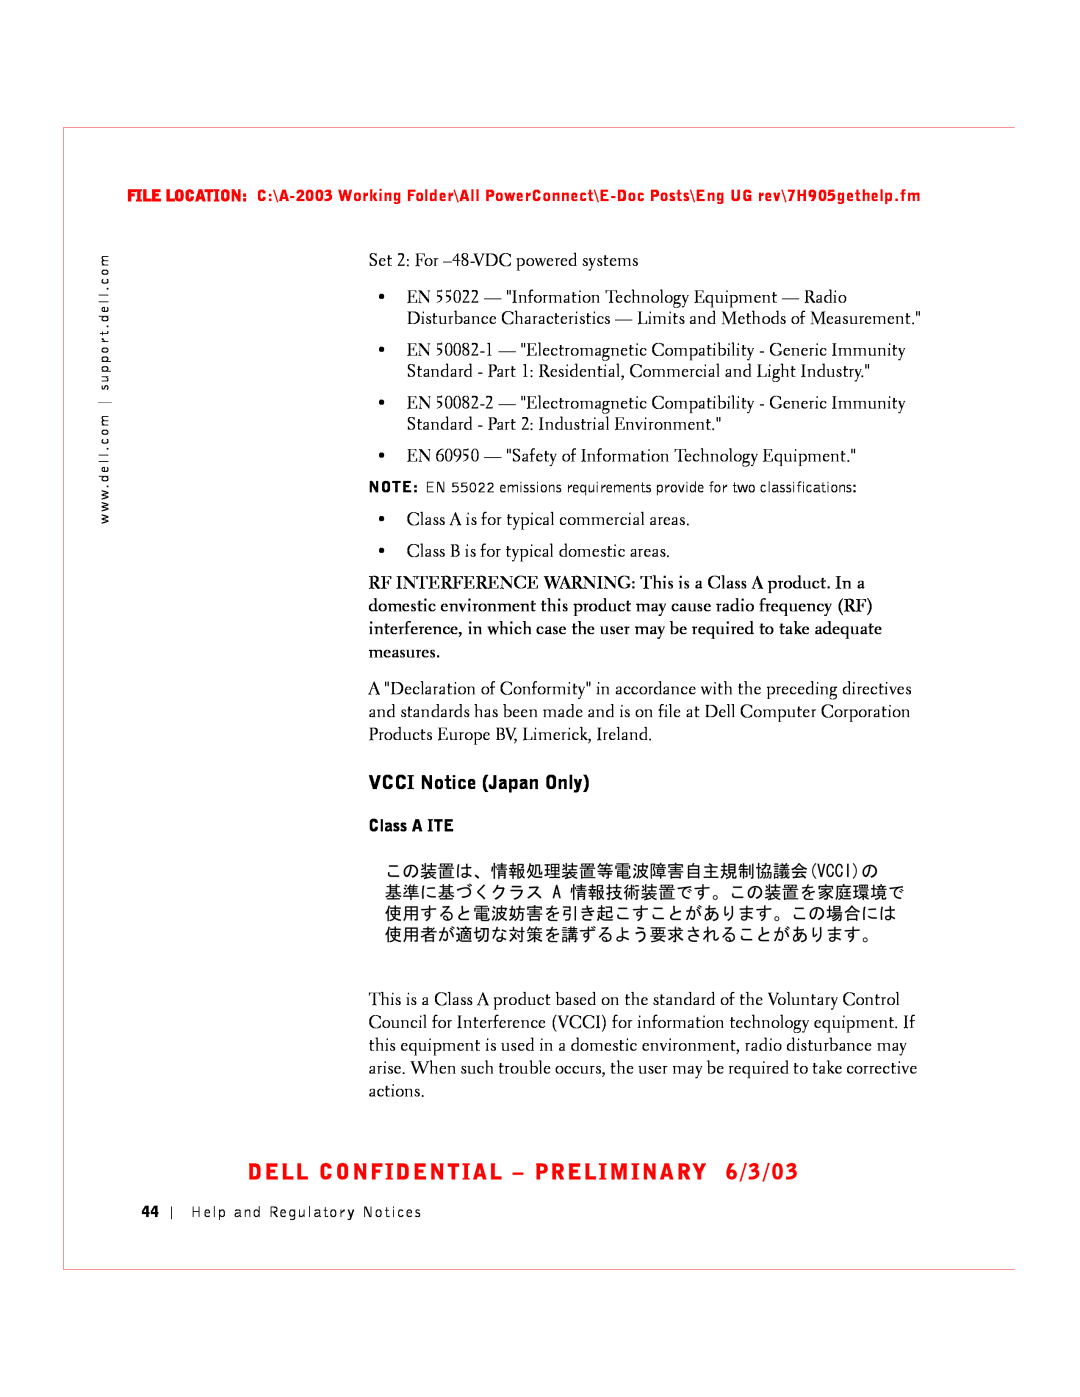 Dell 2016, 2024 manual VCCI Notice Japan Only, Class A ITE, DELL CONFIDENTIAL - PRELIMINARY 6/3/03 